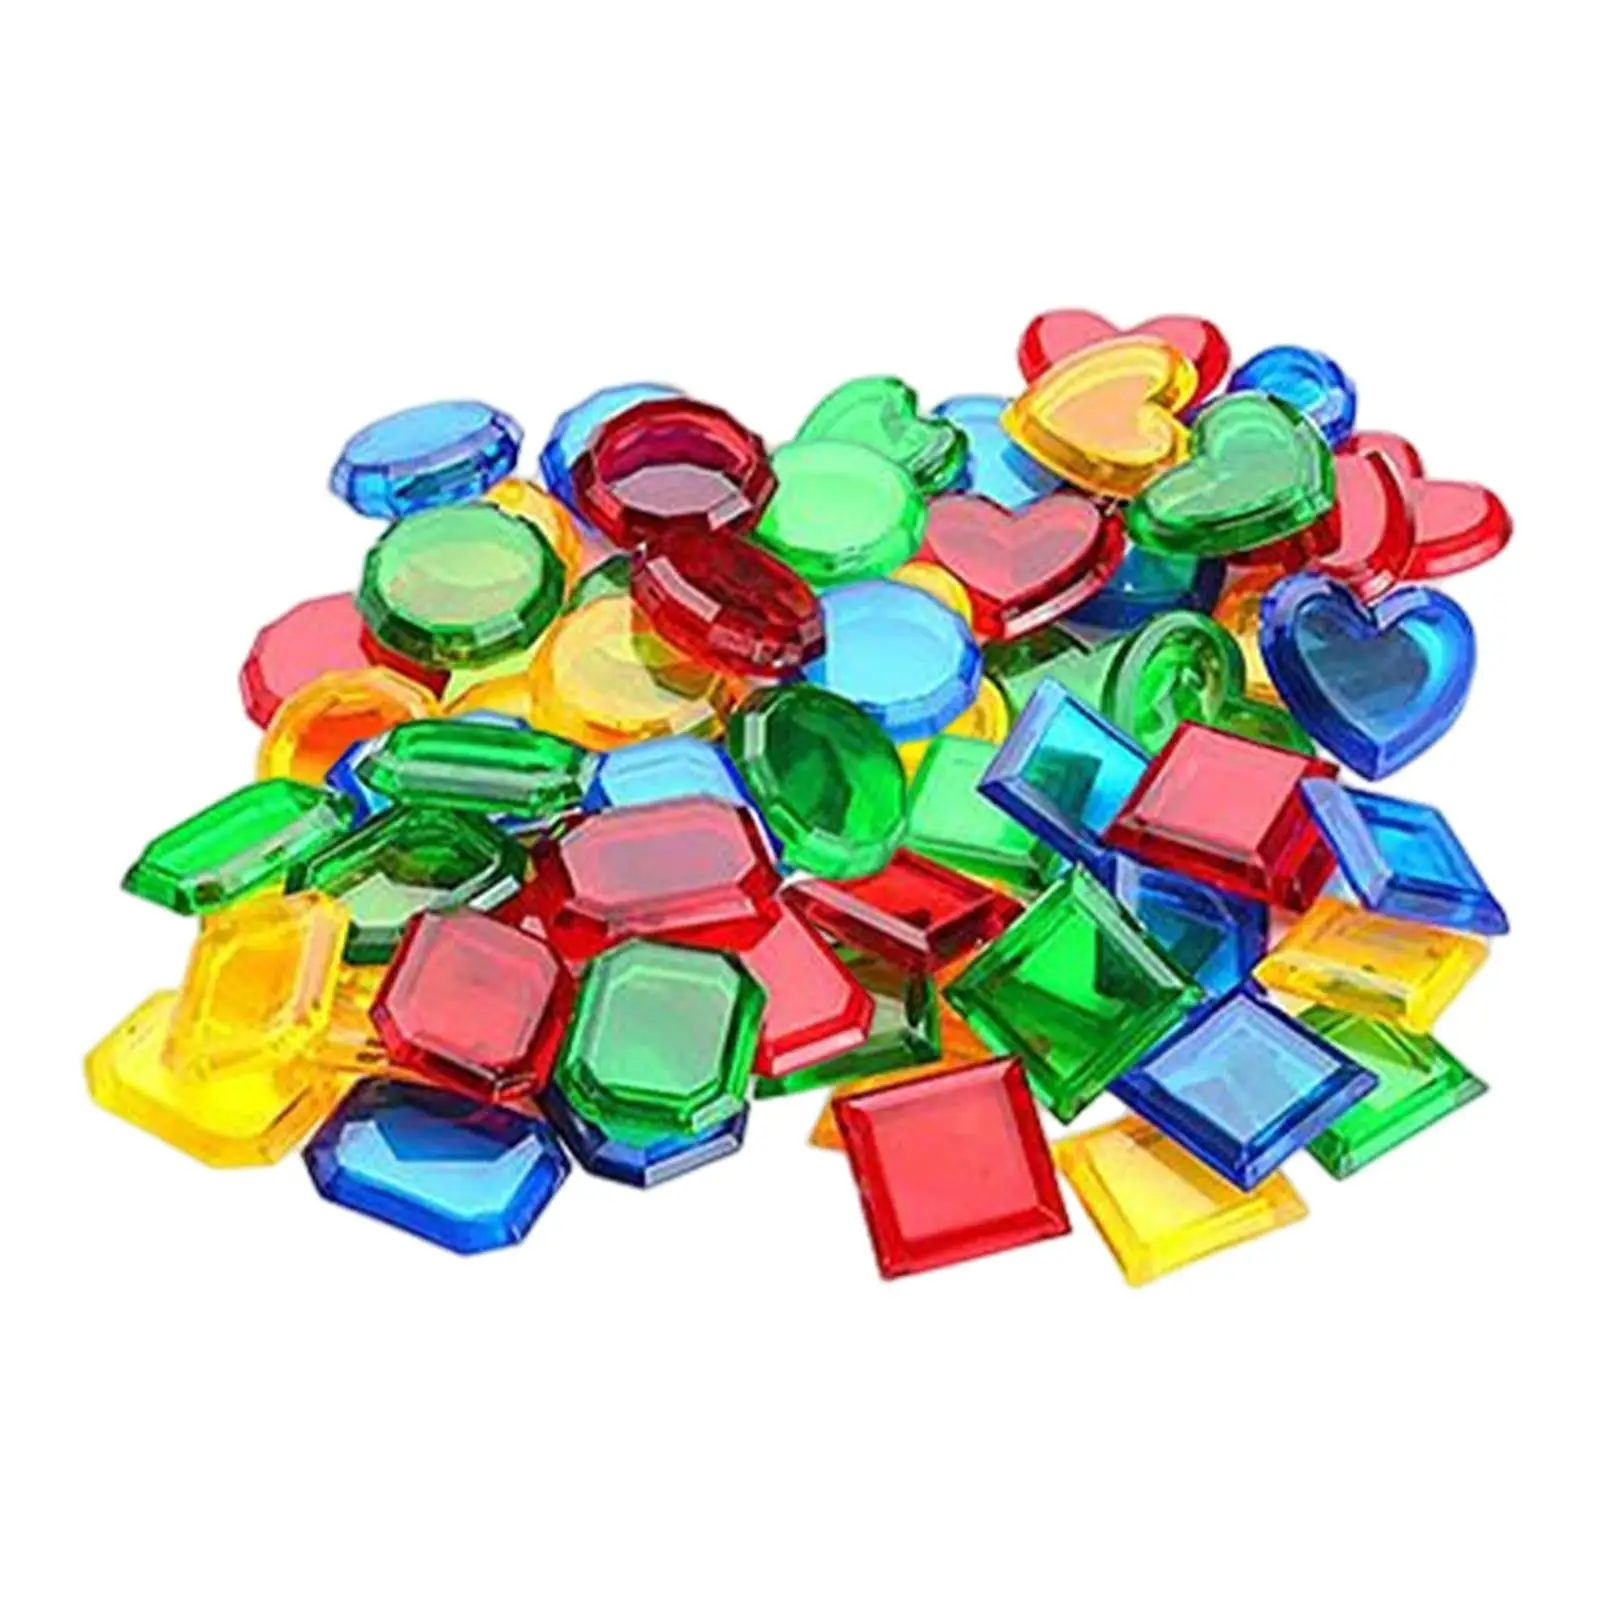 32 Pieces Diving Toy Sensory Toys Gifts for Swimming Pool Travel Parties